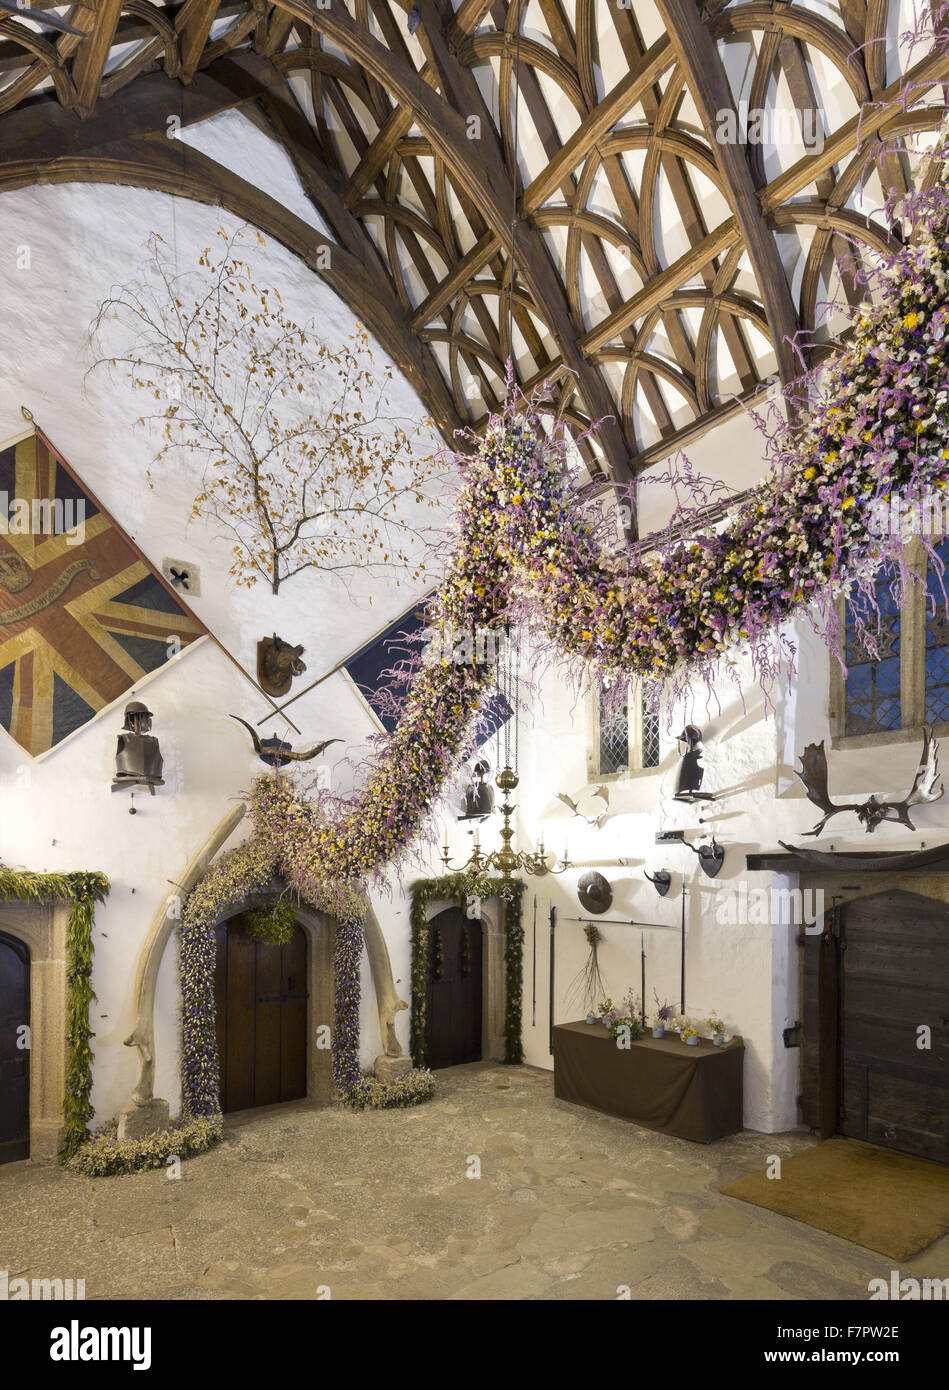 The Christmas Garland in the Tudor Hall at Cotehele, Cornwall. The garland is constructed annually from flowers grown and dried at Cotehele - a tradition which began in the 1950s. 2013 was a bumper year, with approximately 40,000 flowers making up the gar Stock Photo